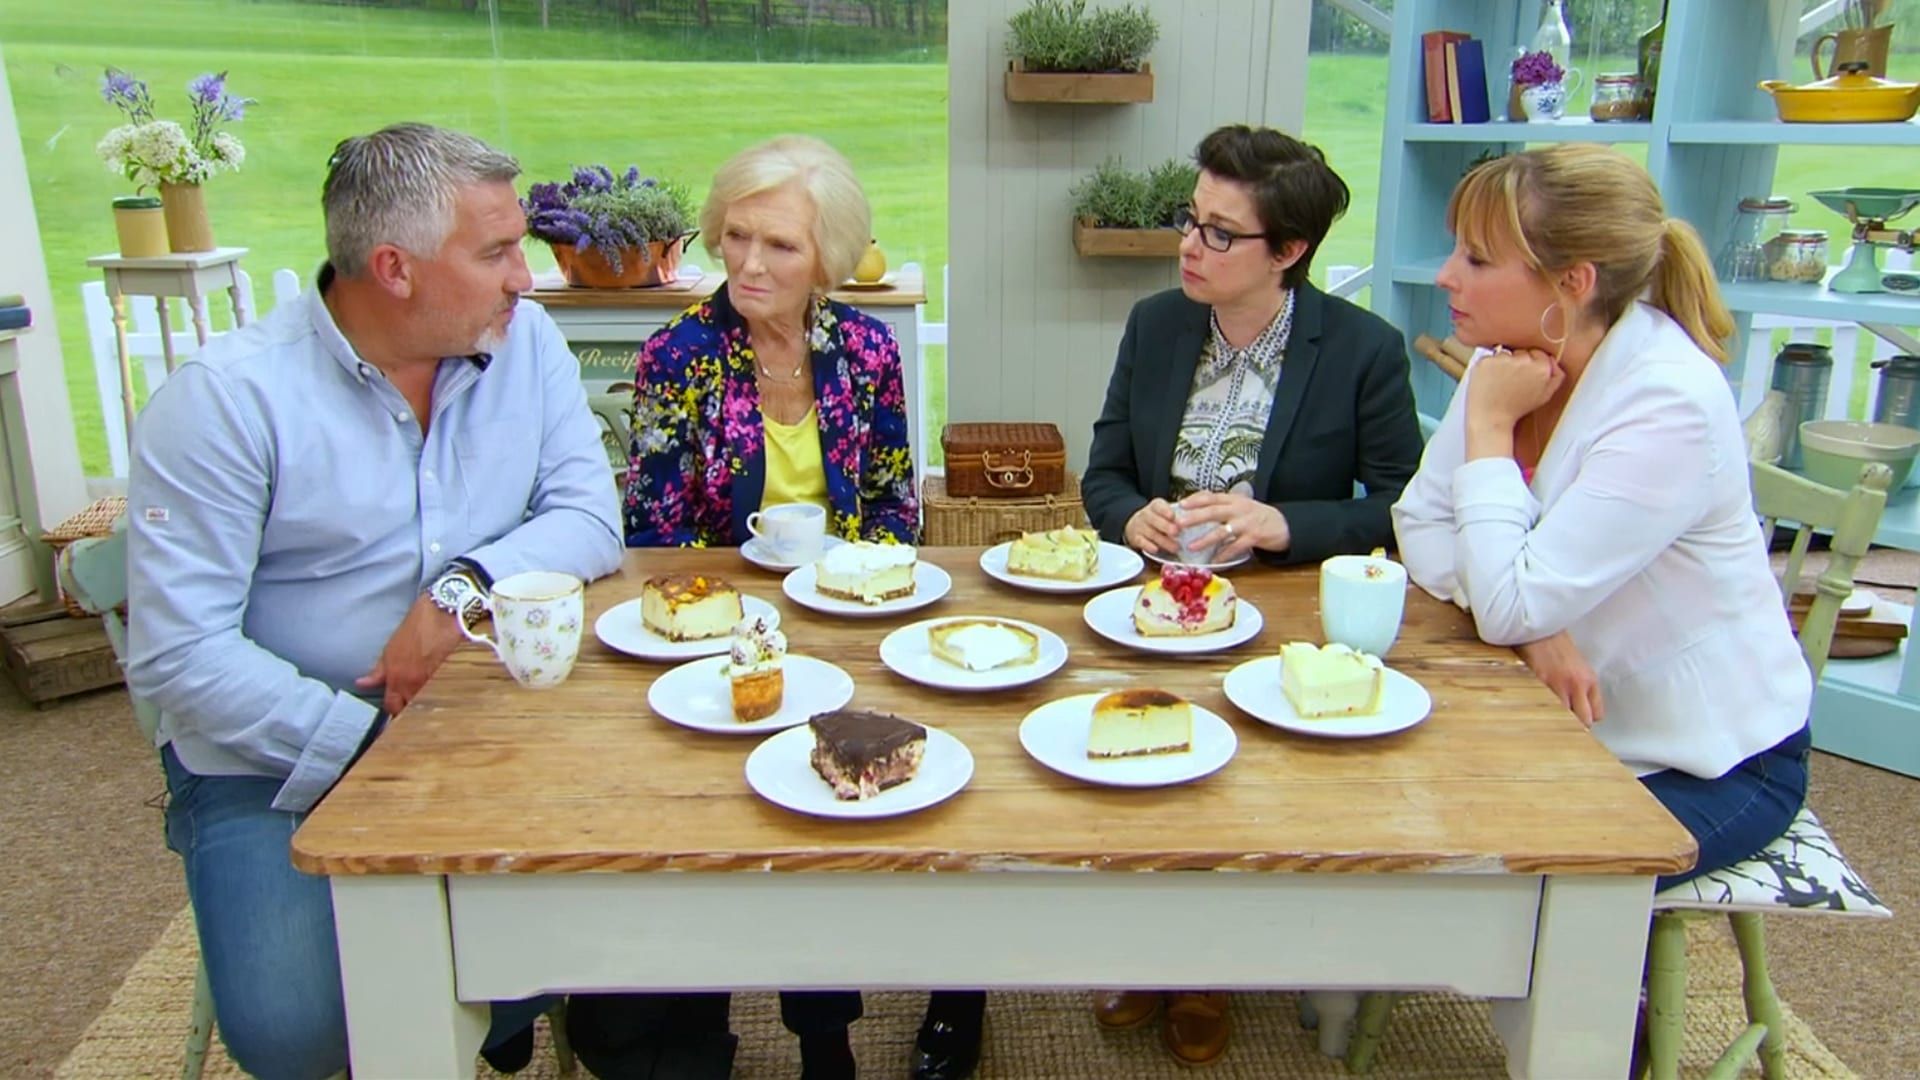 The Great British Baking Show background